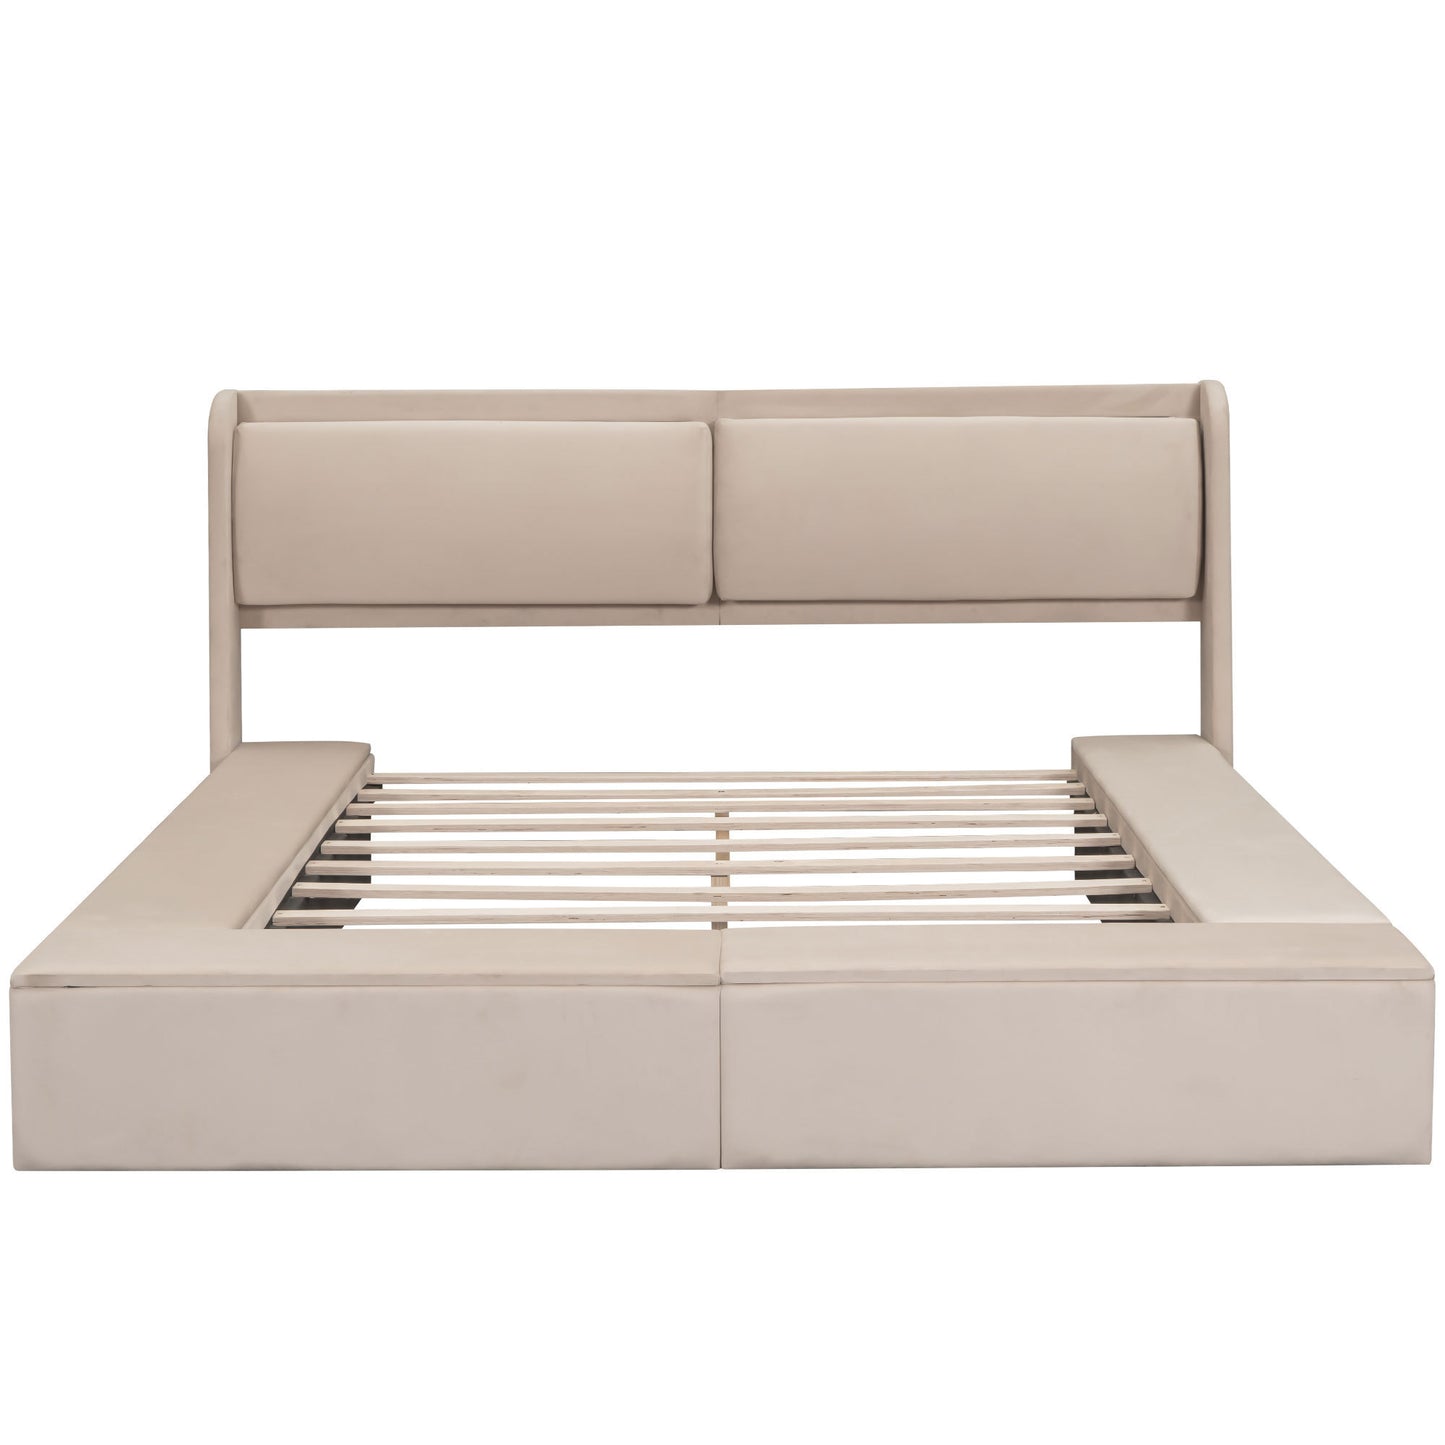 Queen Size Upholstery Storage Platform Bed with Storage Space on both Sides and Footboard, Beige - Enova Luxe Home Store